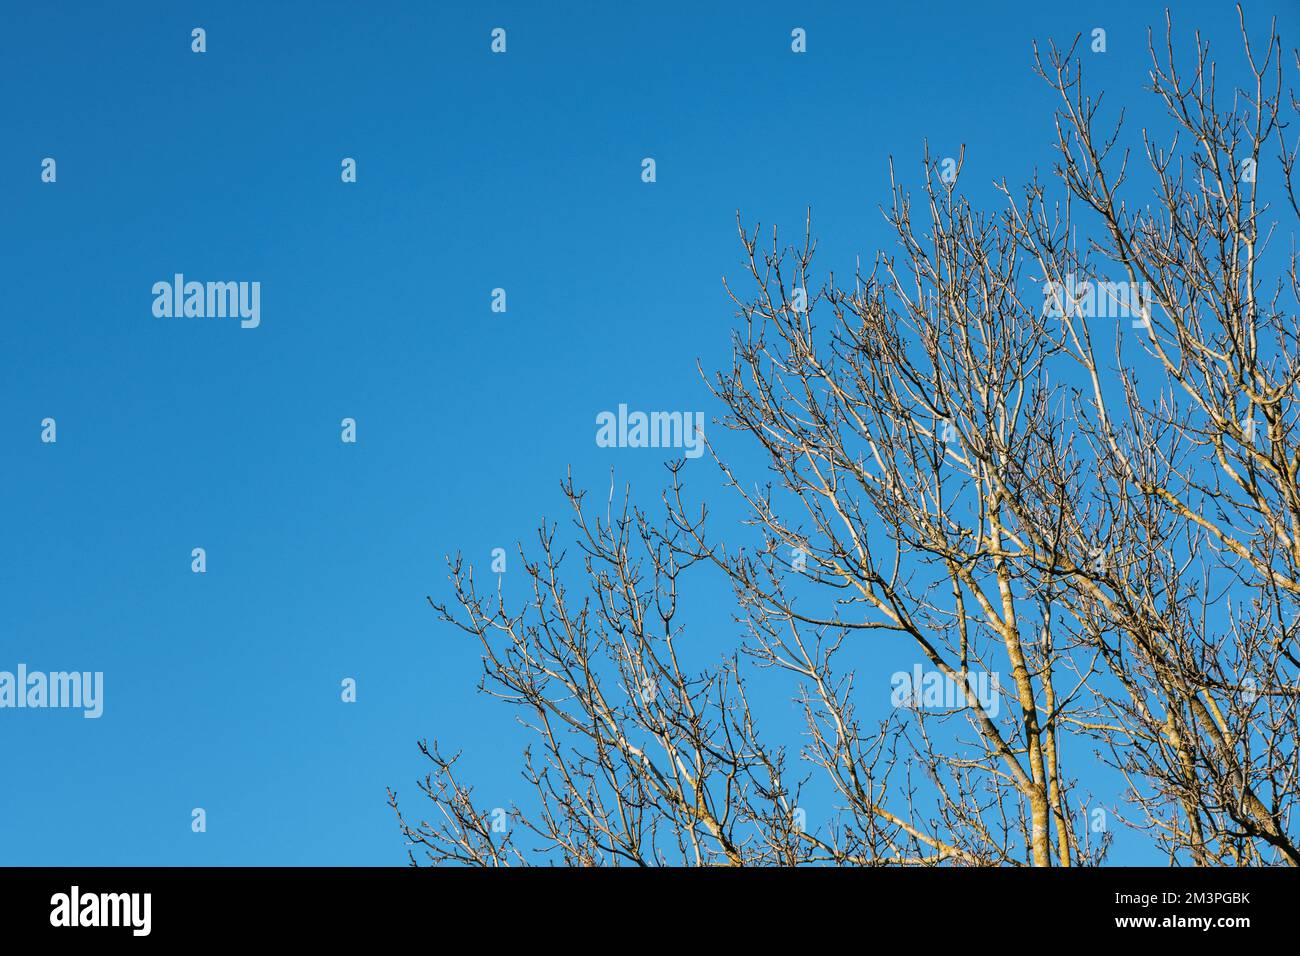 Trees With No Leaves On A Cold Winters Morning With No People Stock Photo